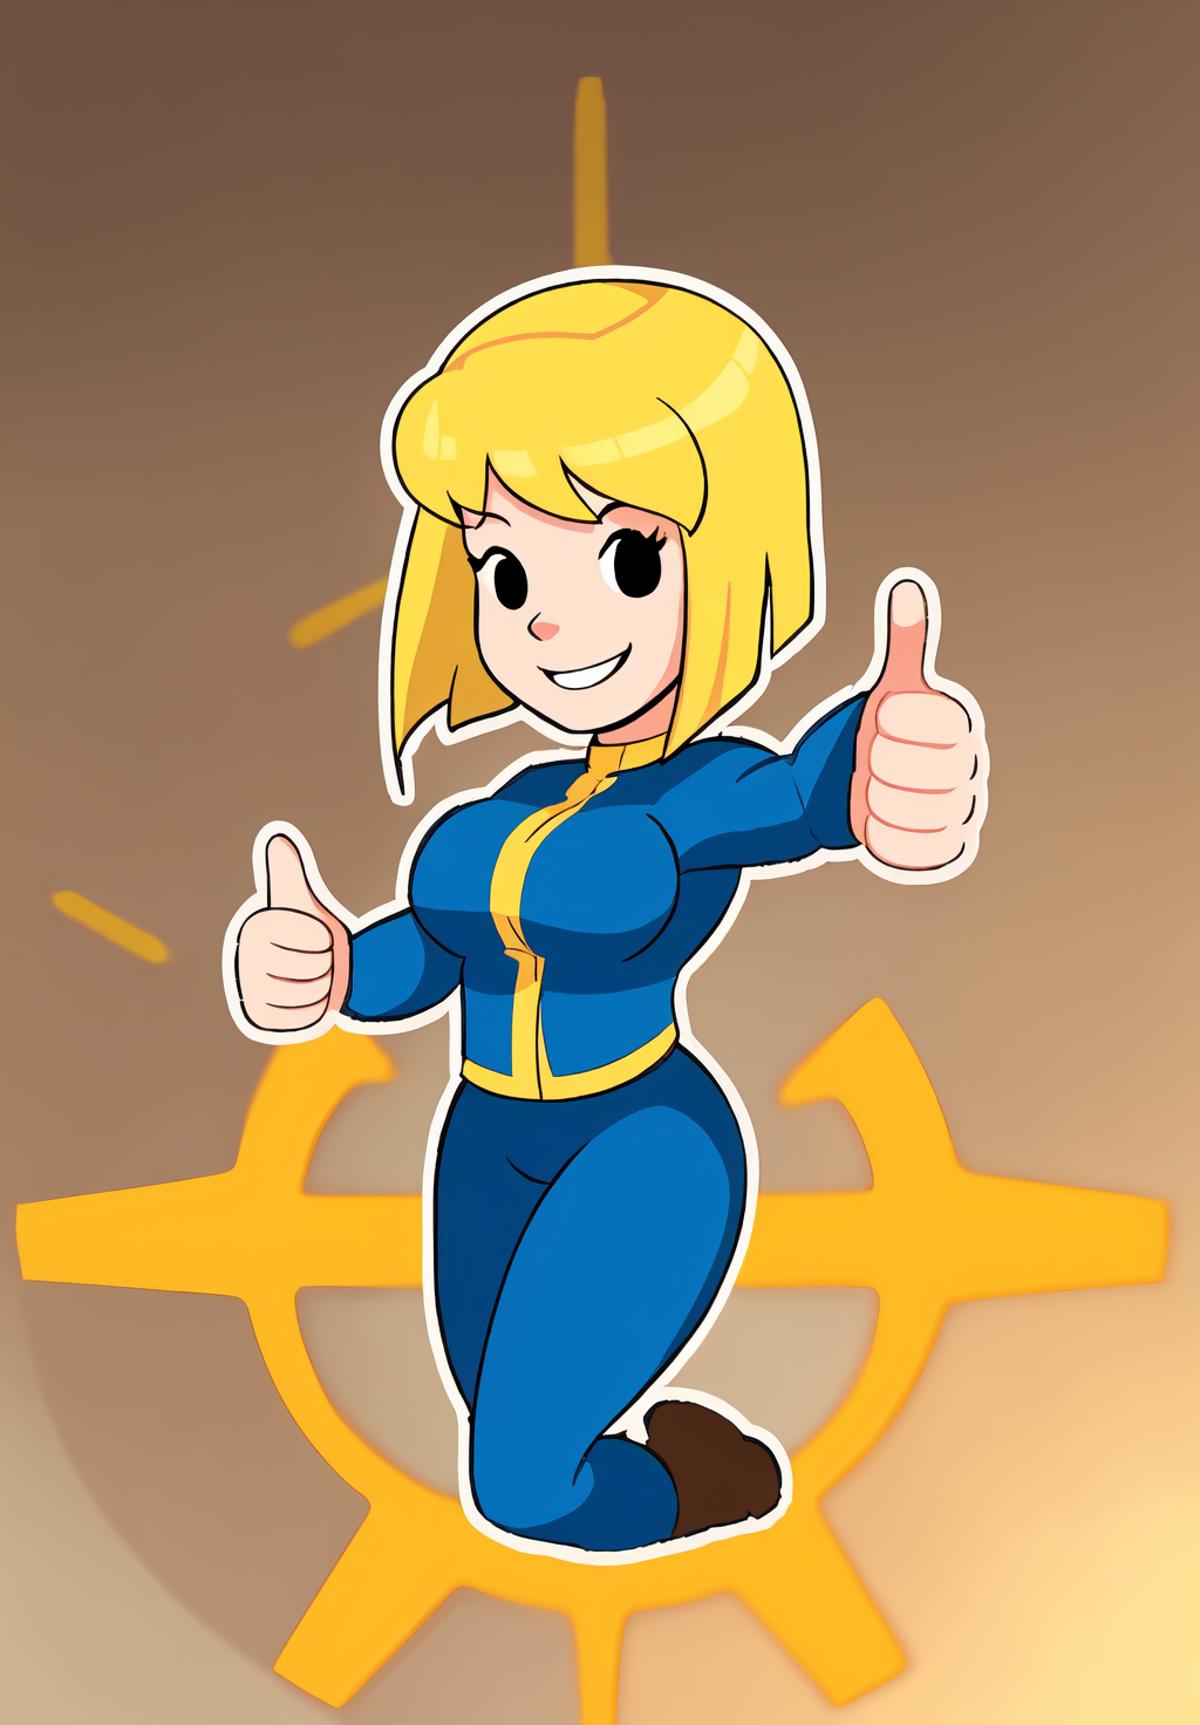 Vault-Girl - Fallout image by AsaTyr